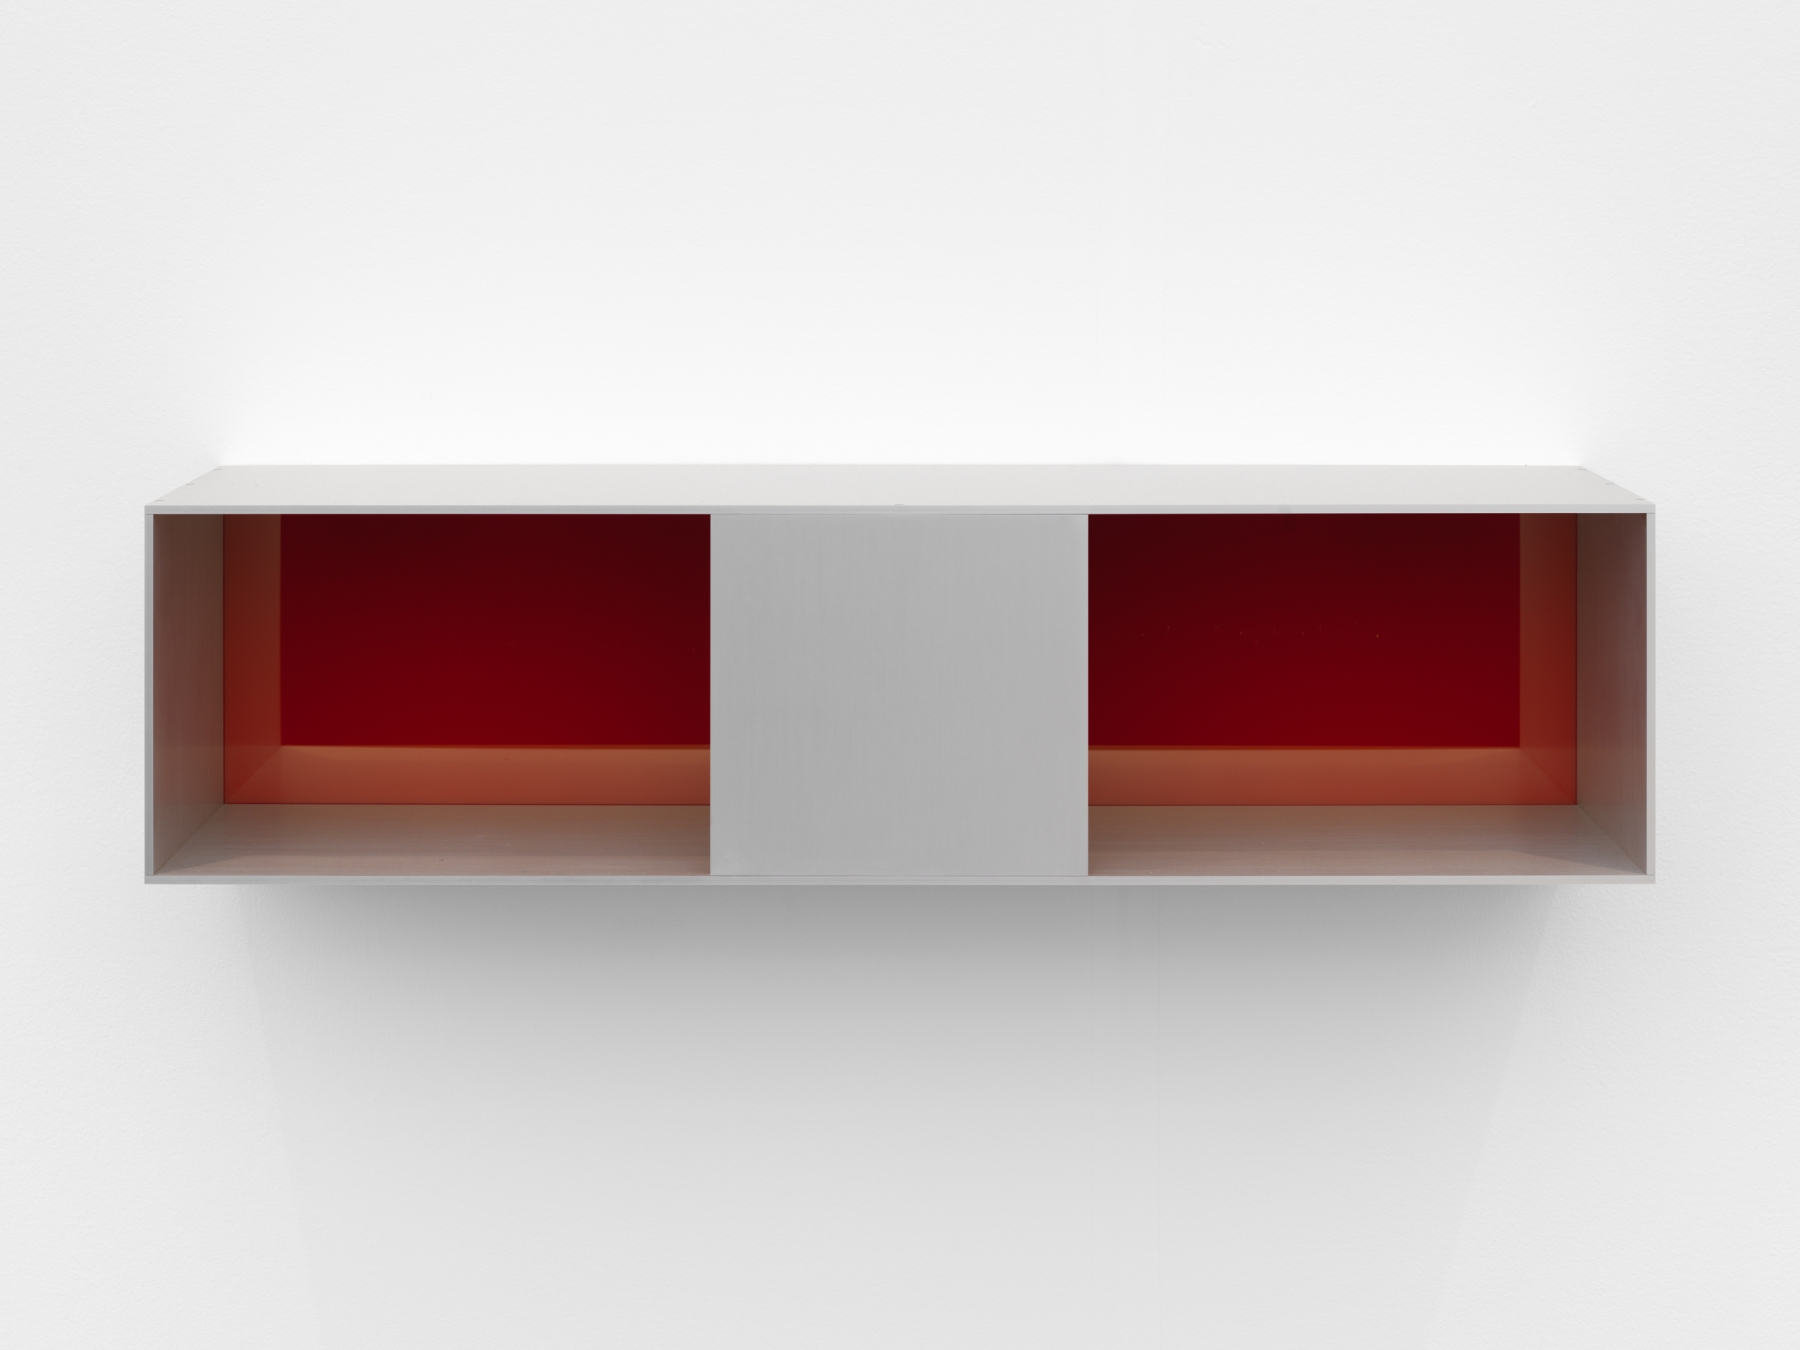 Donald Judd, Untitled, 1991. Clear anodized aluminum with yellow over red acrylic sheet,

10 x 40 x 10 inches.